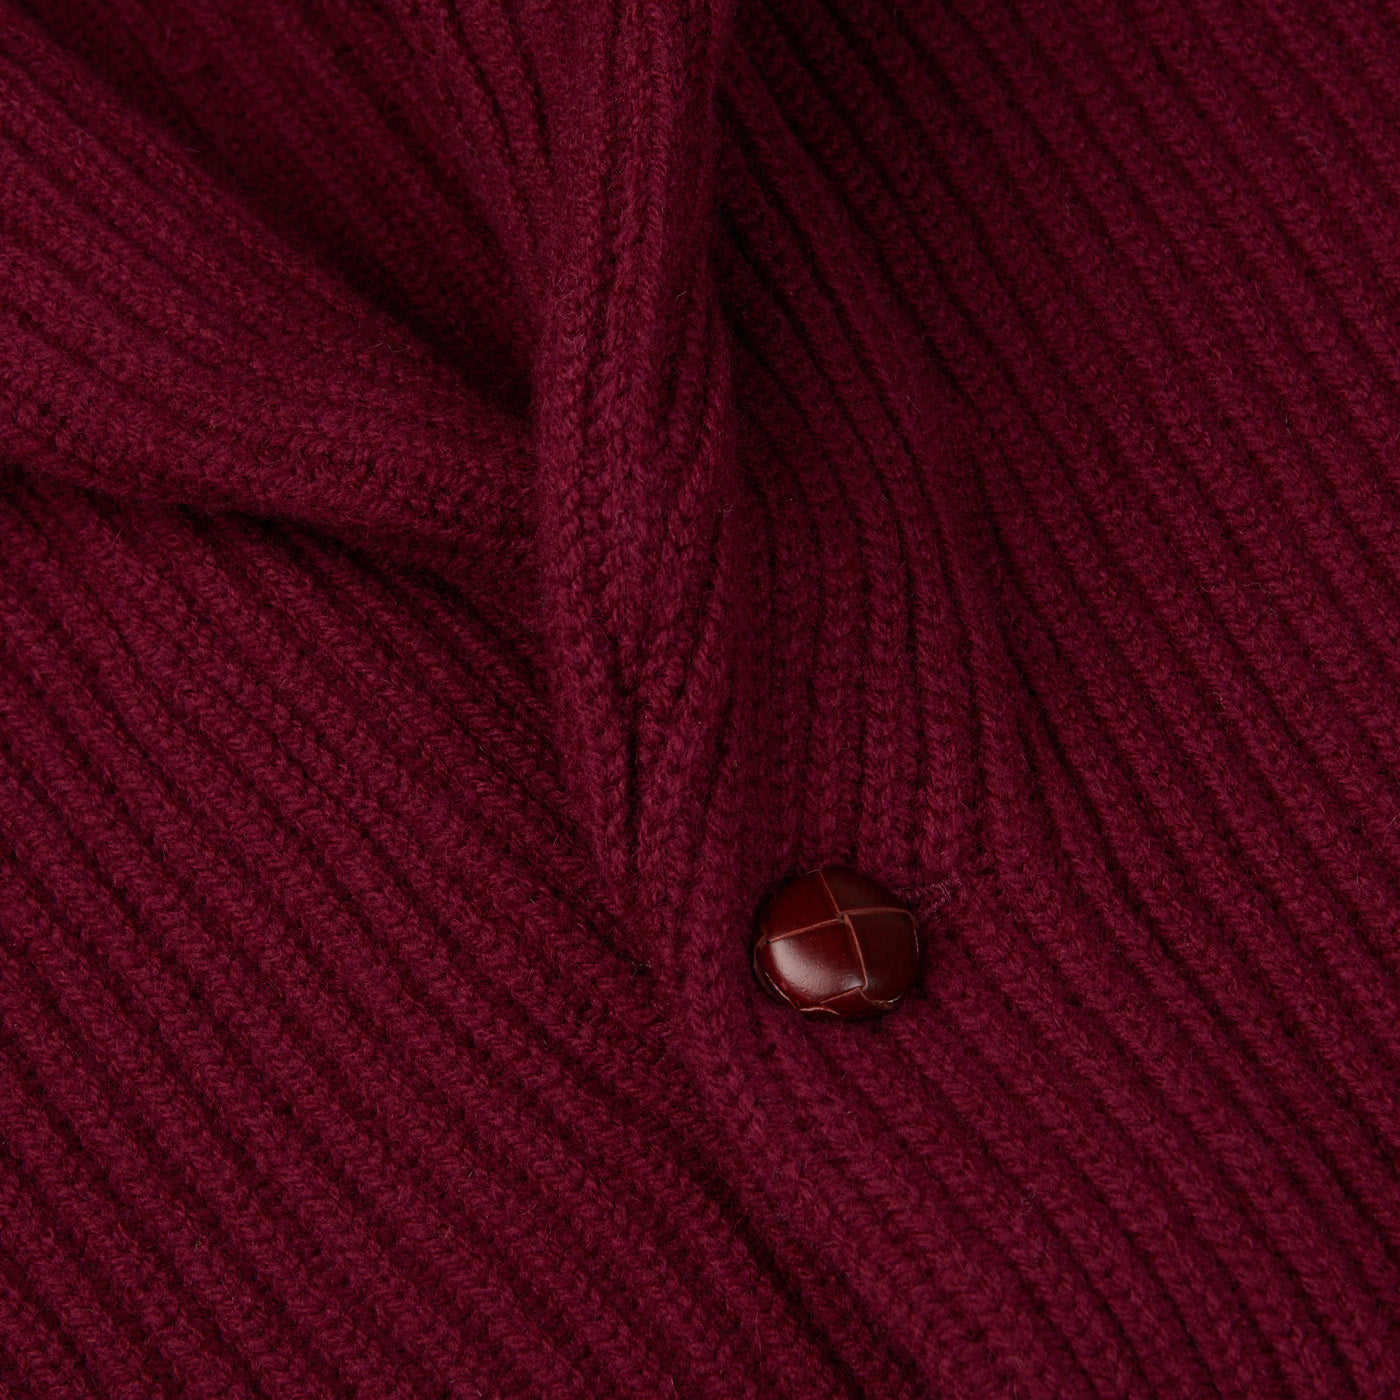 A close up of a William Lockie Bordeaux Lambswool Shawl Collar Cardigan with leather buttons.